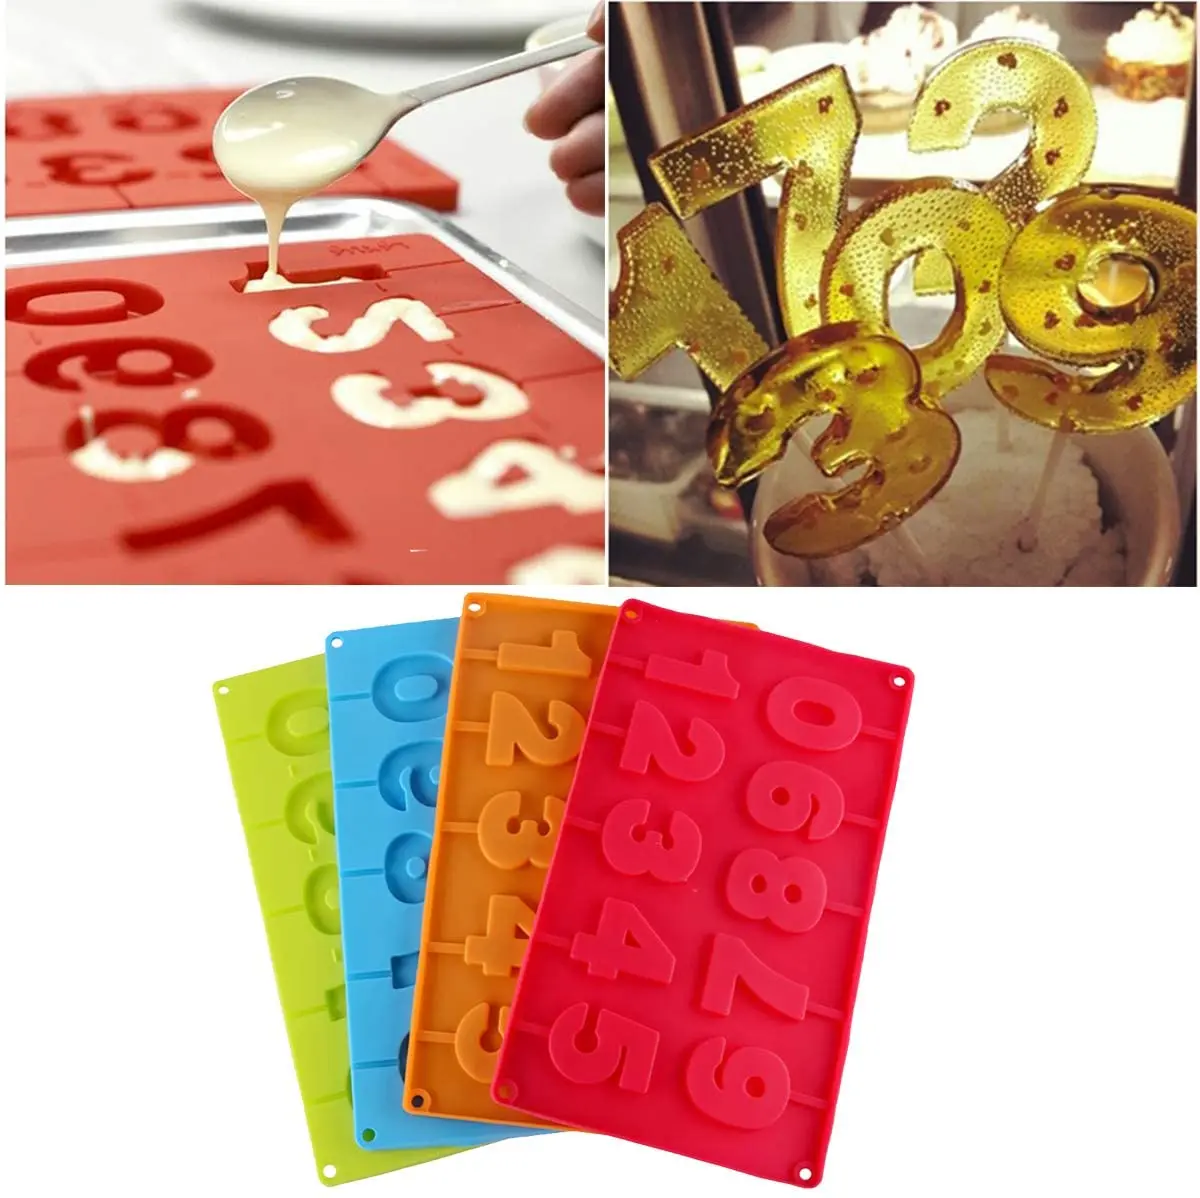 

Lollipop Silicone Mold 3D DIY 0-9 Number Homemade Dessert Mould For Cake Chocolate Candy Ice Cubes Tray Baking Accessories Tools